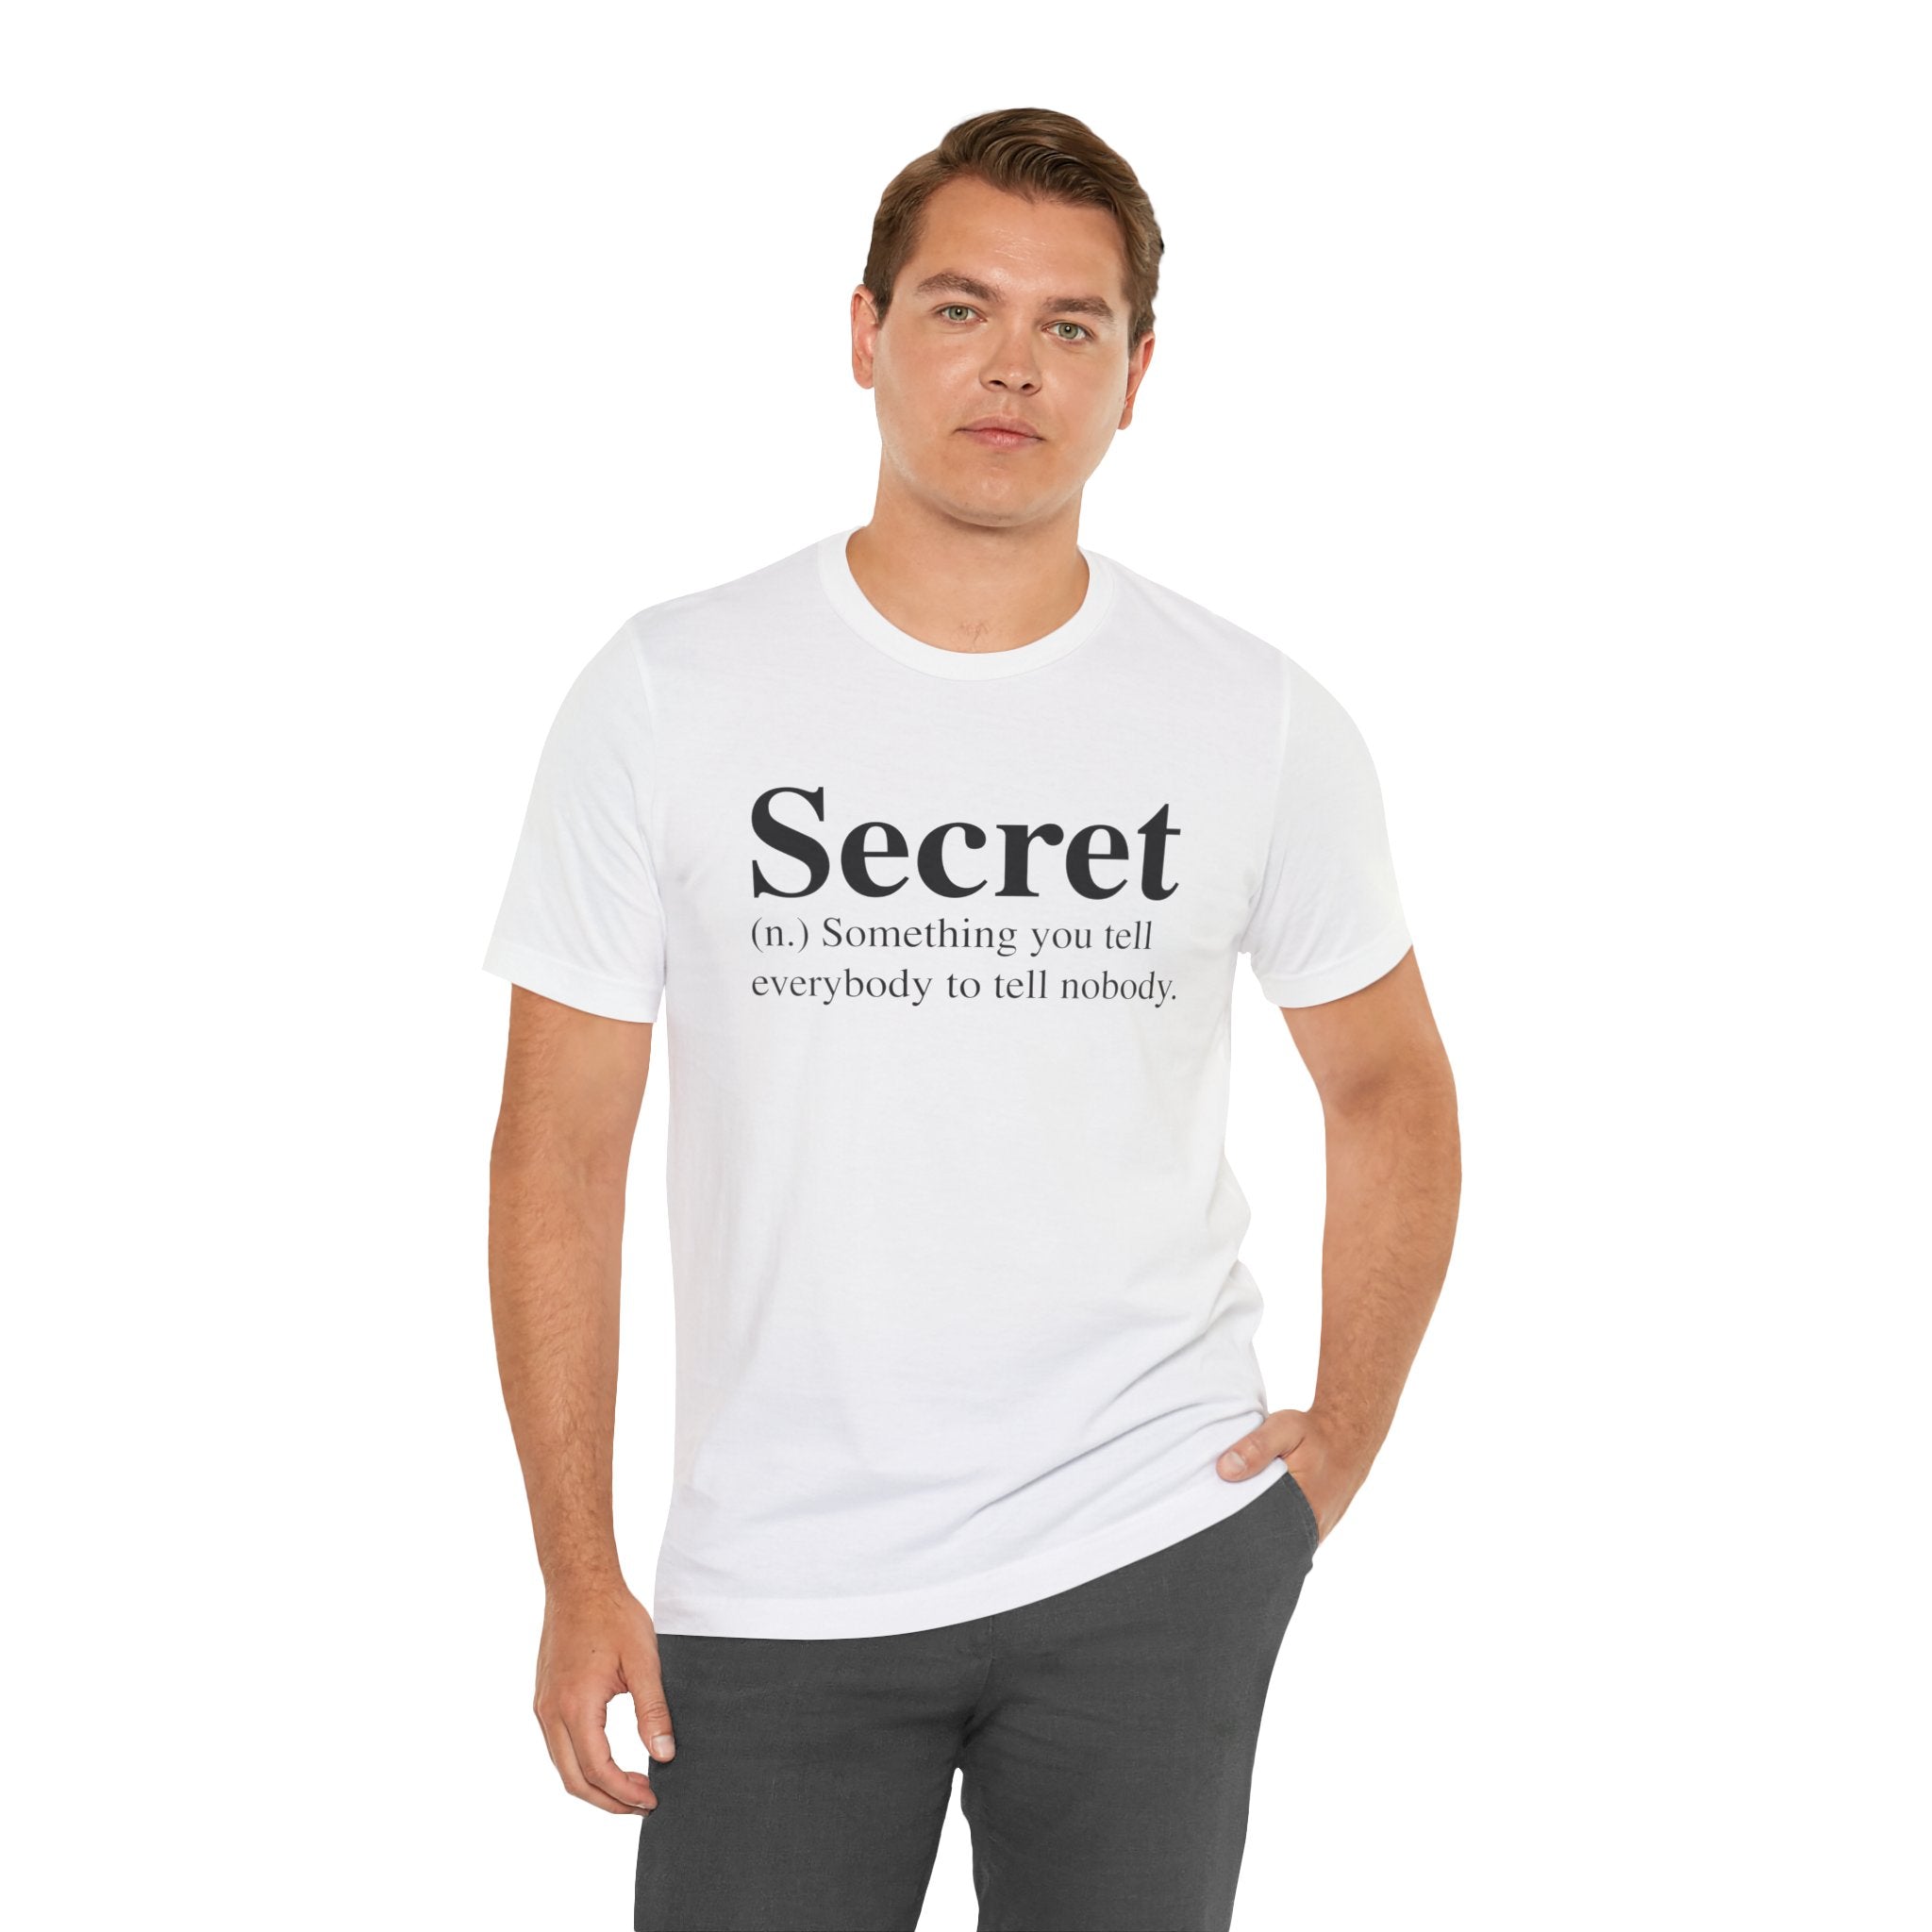 Man in a Secret T-Shirt with the word "secret" and its humorous definition printed in quality print, standing against a white background.